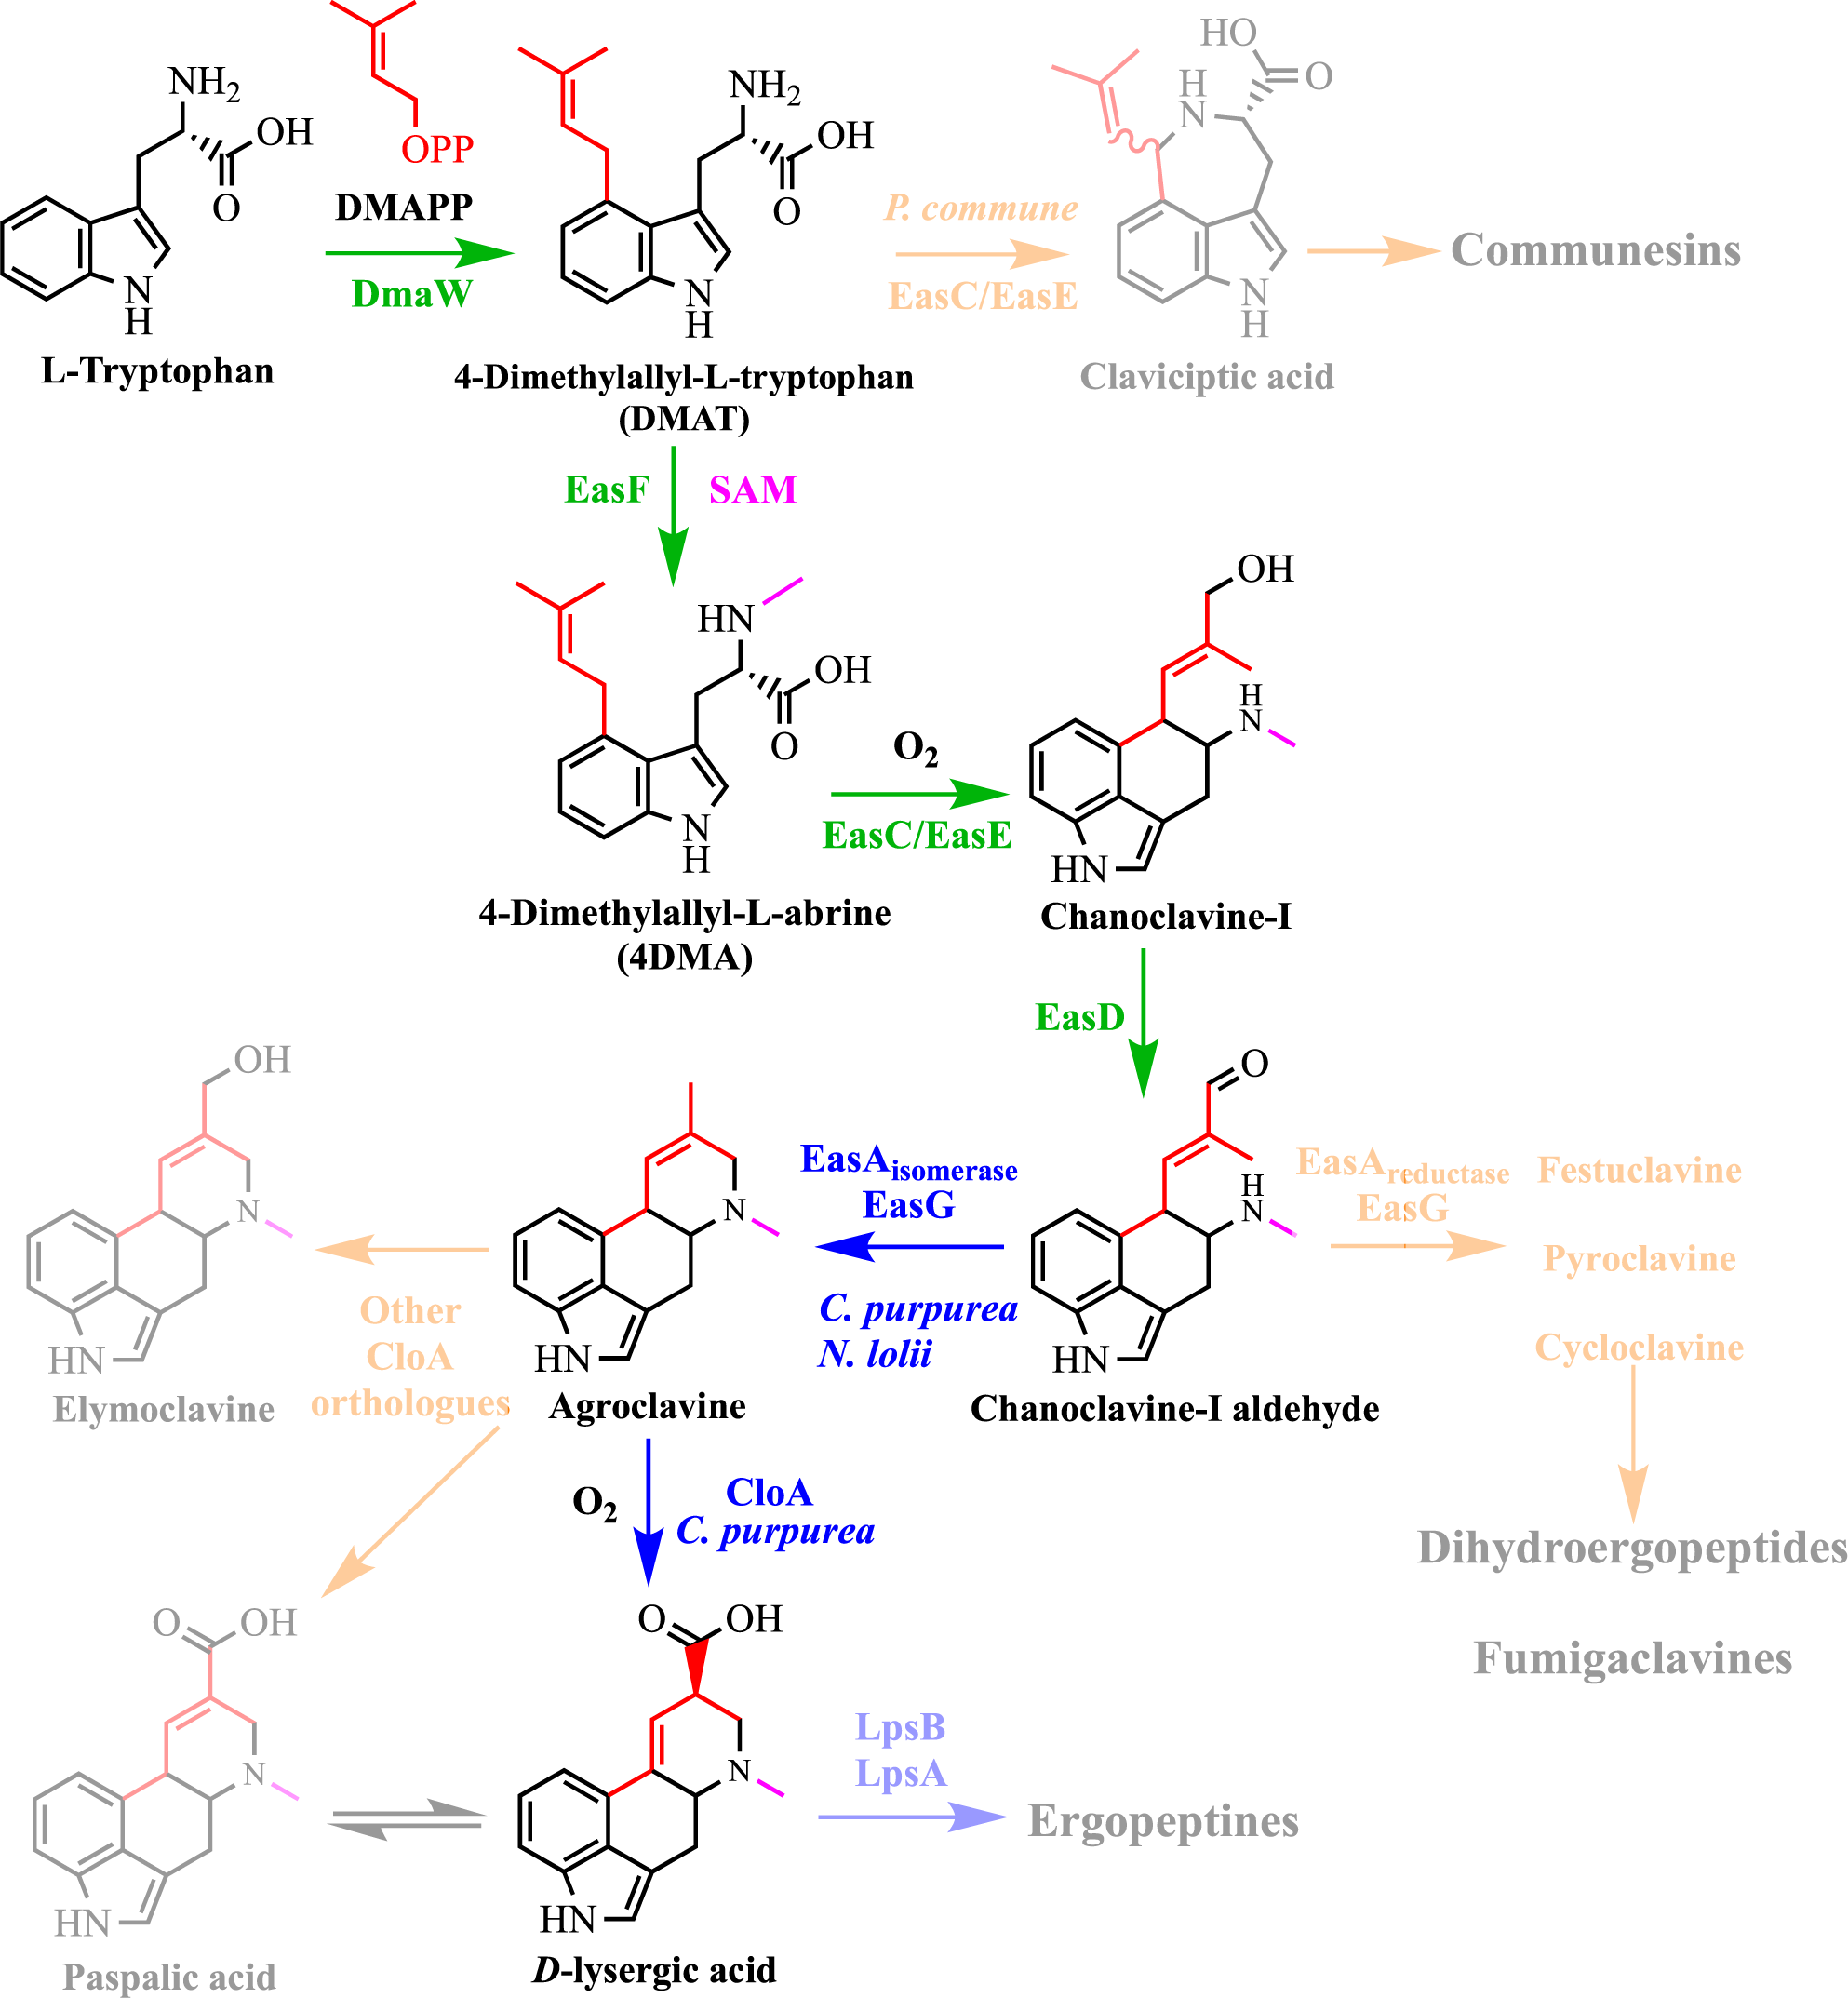 Reconstituting the complete biosynthesis of D-lysergic acid in yeast |  Nature Communications